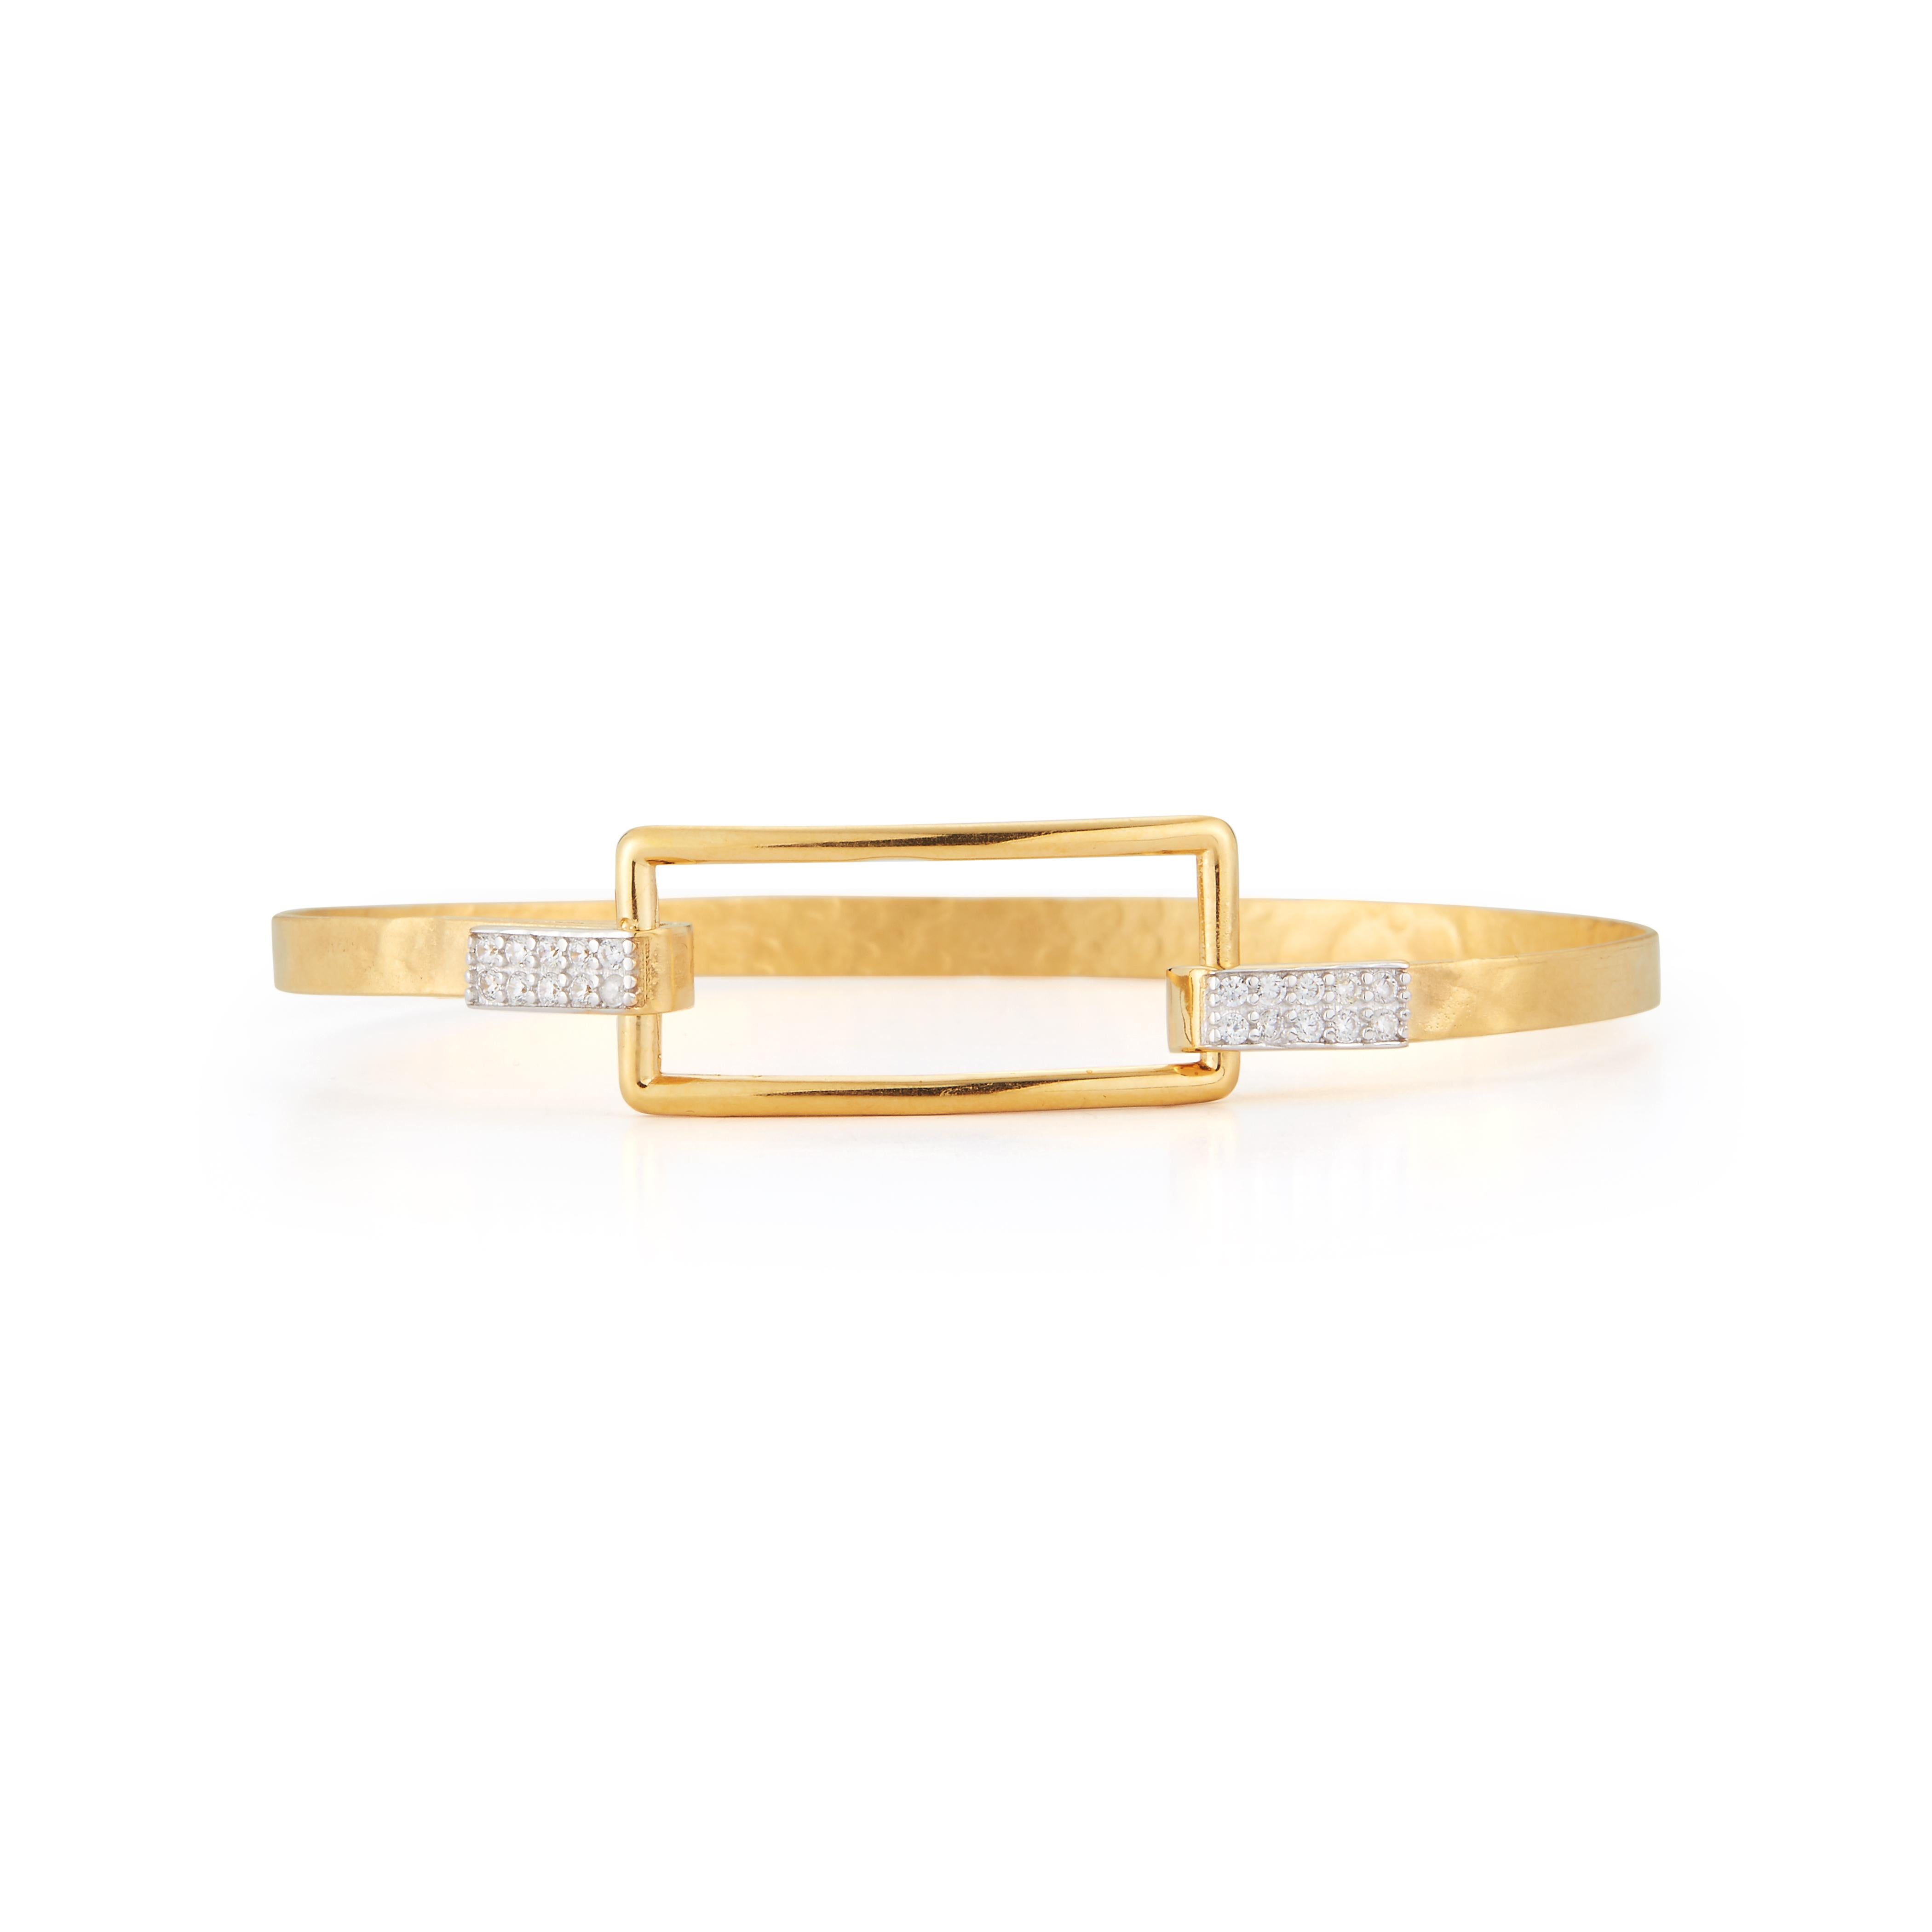 14 Karat Yellow Gold Hand-Crafted Matte and Hammer-Finished 4mm Bangle Bracelet, Set with a Polish-Finished Open Rectangle Motif and 0.16 Carats of Pave Set Diamond Hinges.
